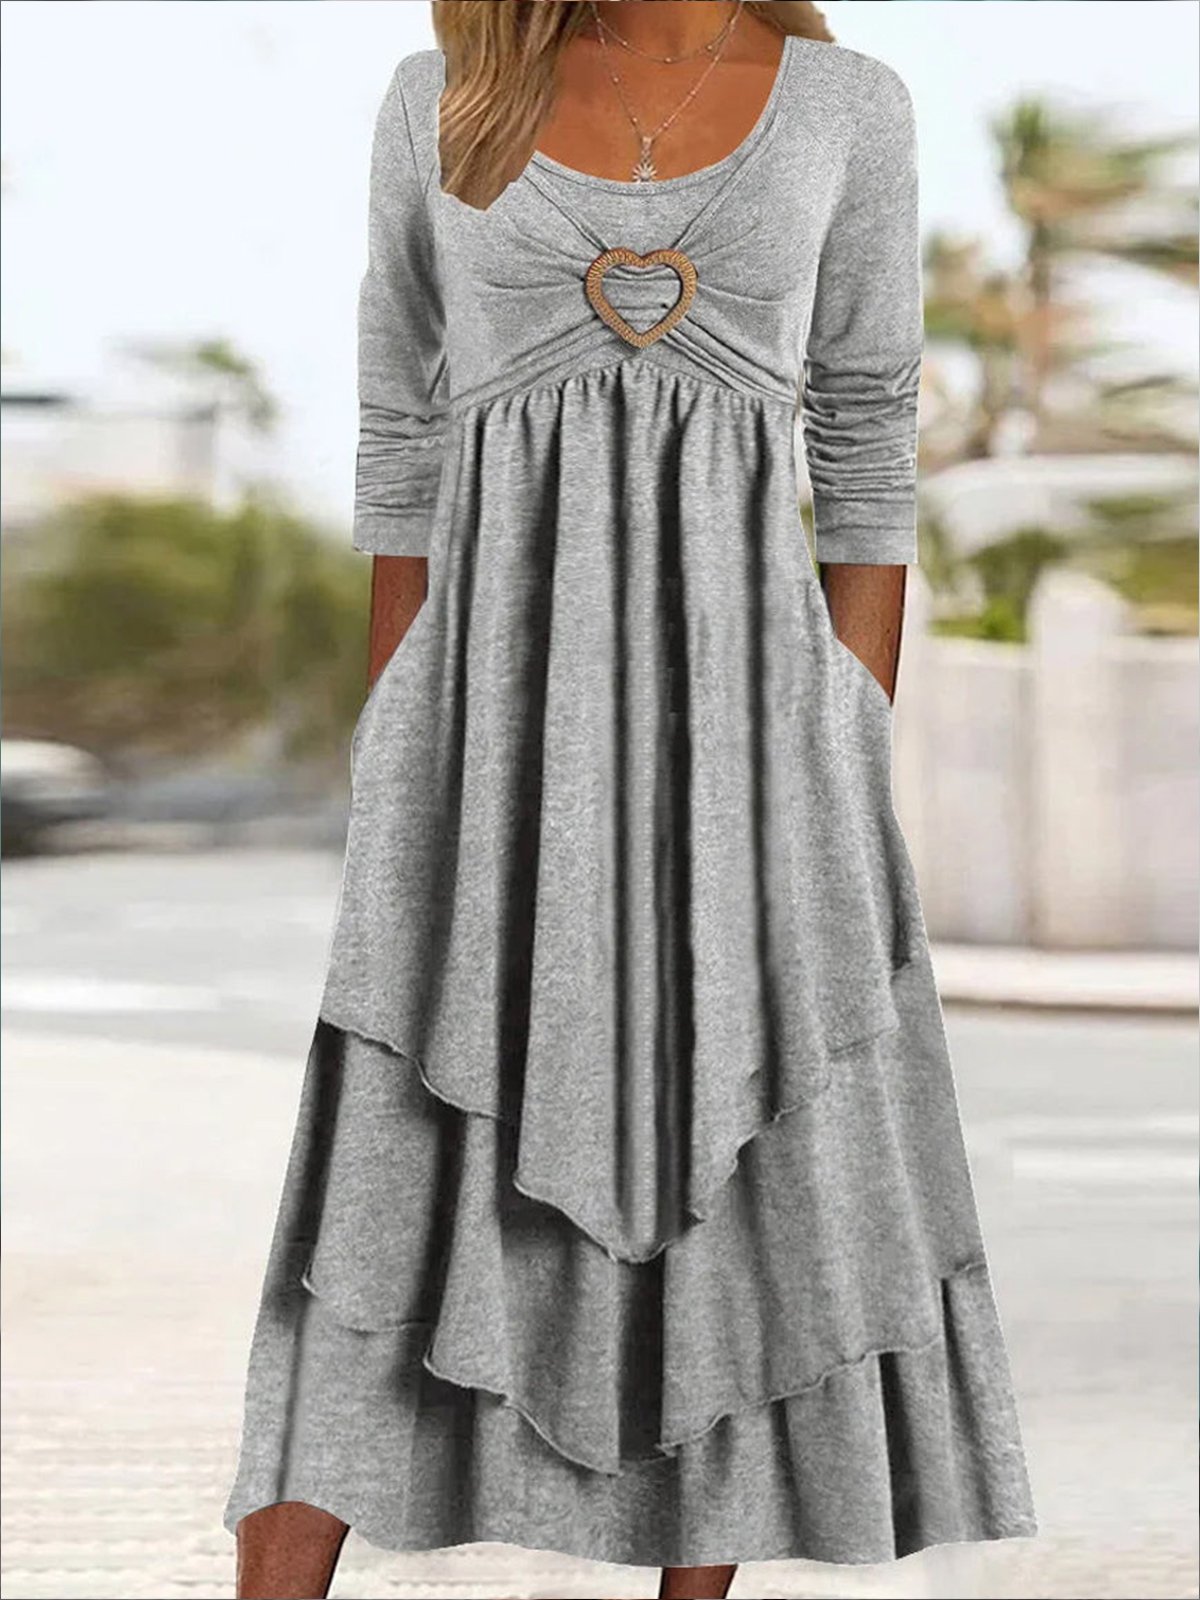 Plain Daily Casual Grommets Jersey Loose A-Line Long Sleeve Maxi Dress